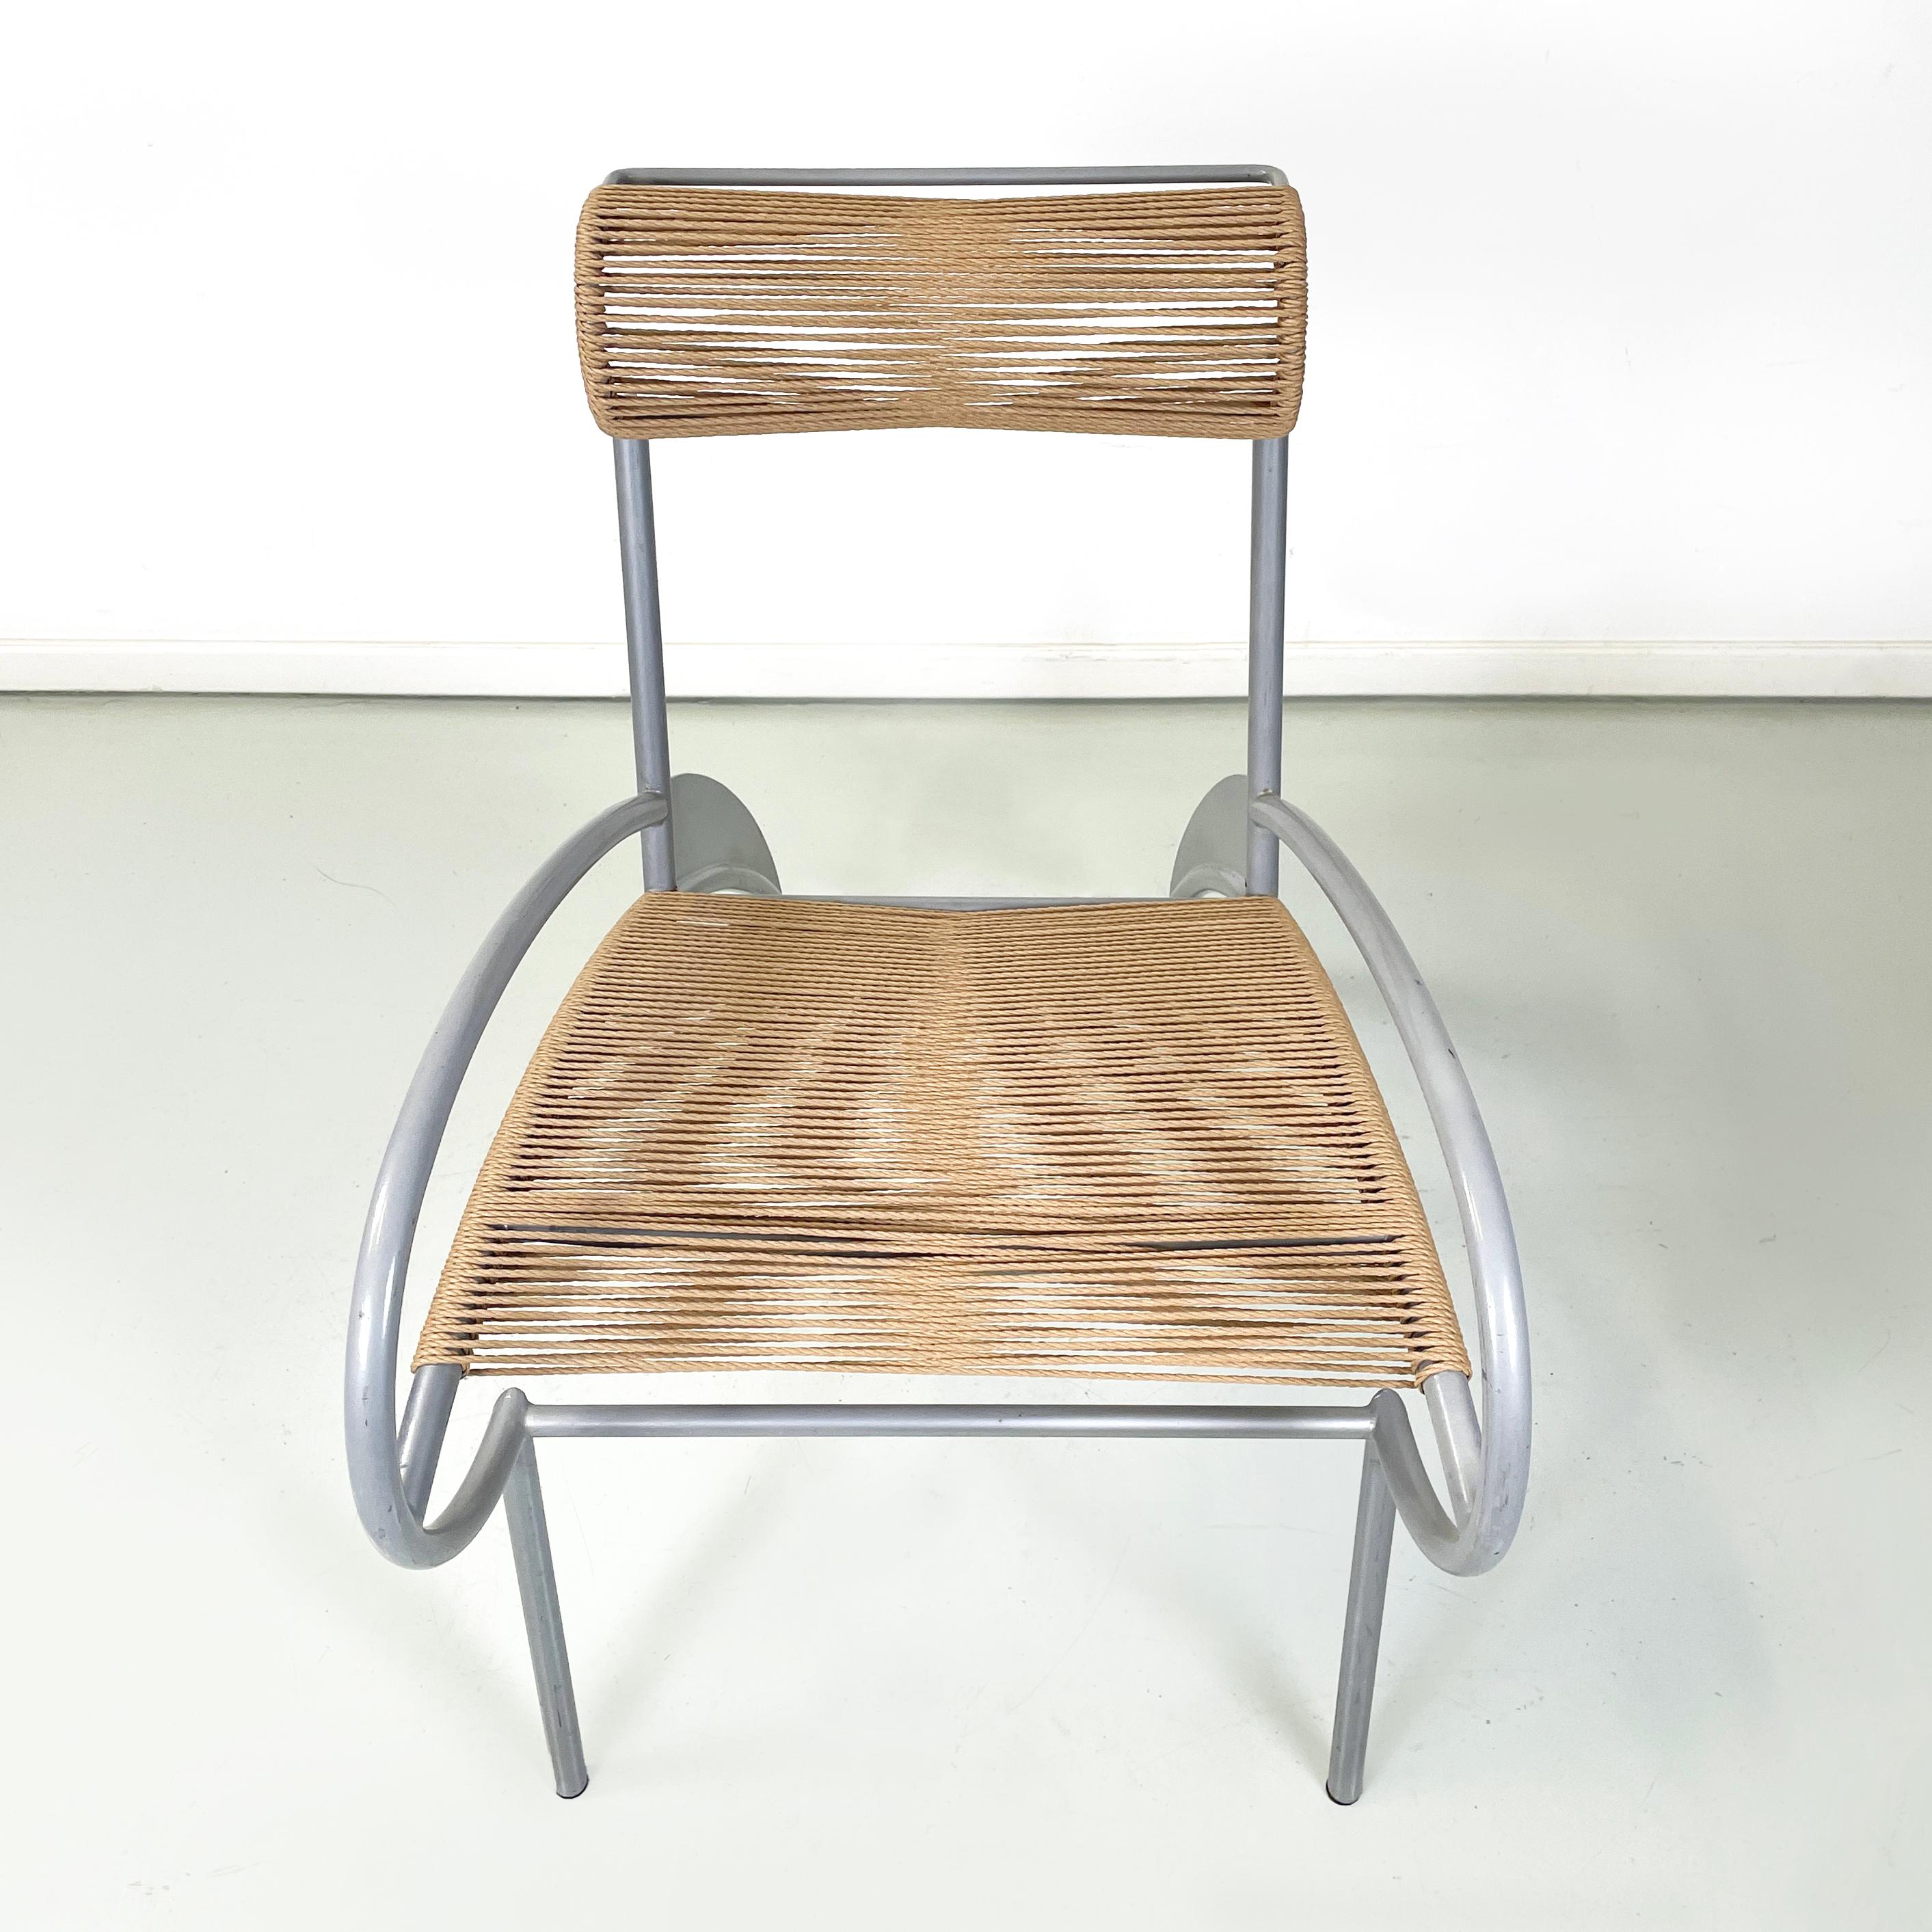 Late 20th Century Italian modern rope and gray steel chair Juliette by Massimo Iosa-Ghini, 1990s For Sale